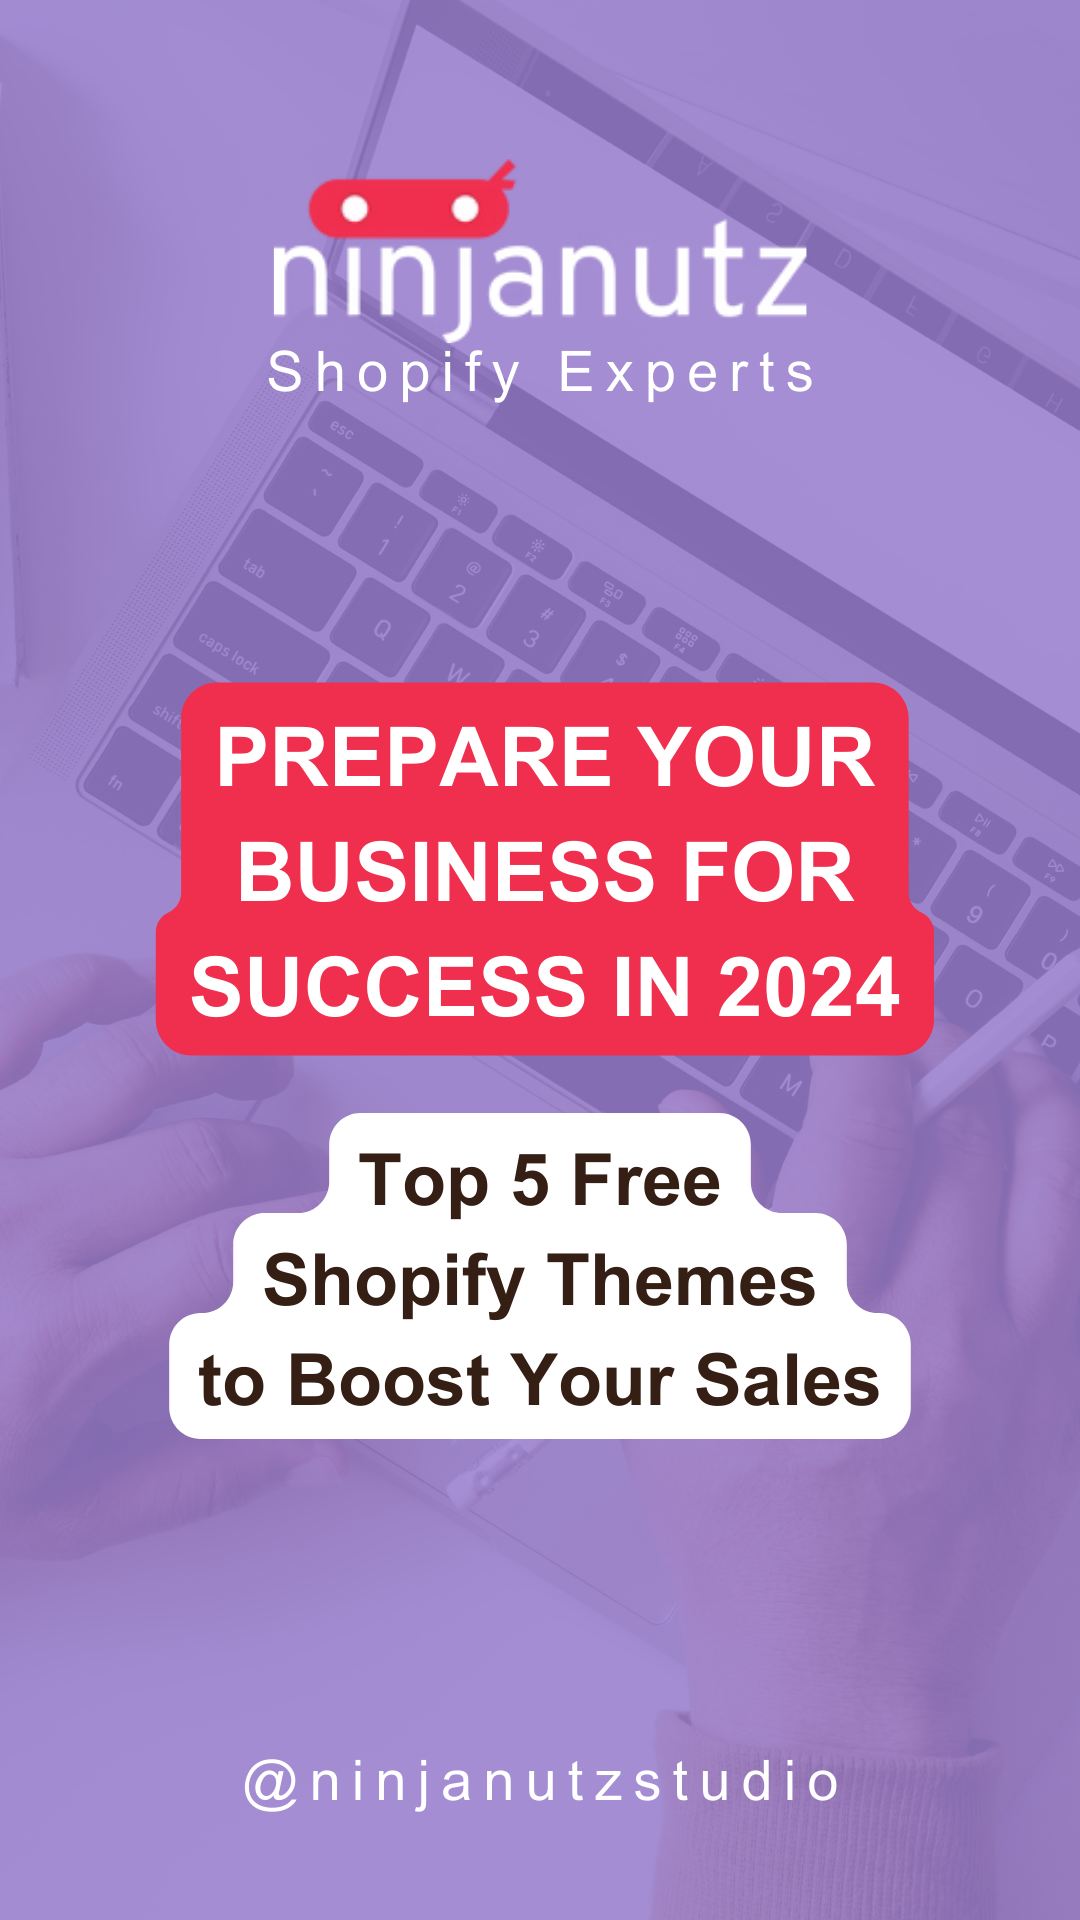 Prepare your business for success in 2024: Top 5 Free Shopify Themes to Boost Your Sales NinjaNutz®